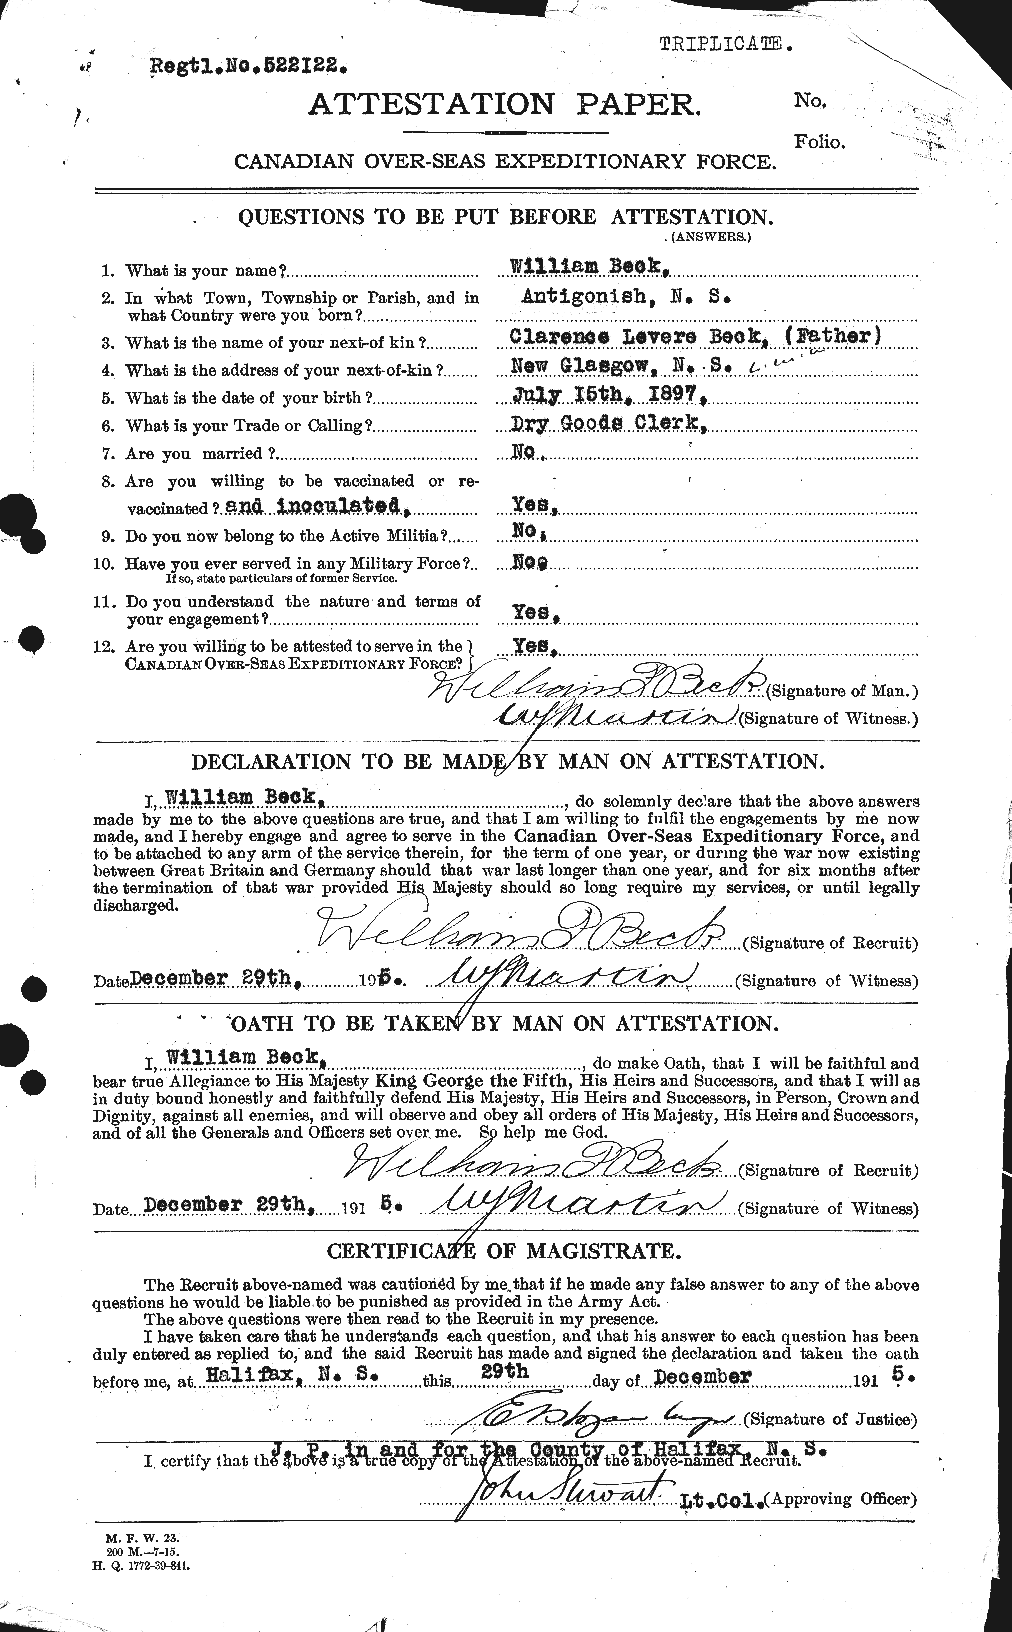 Personnel Records of the First World War - CEF 232243a